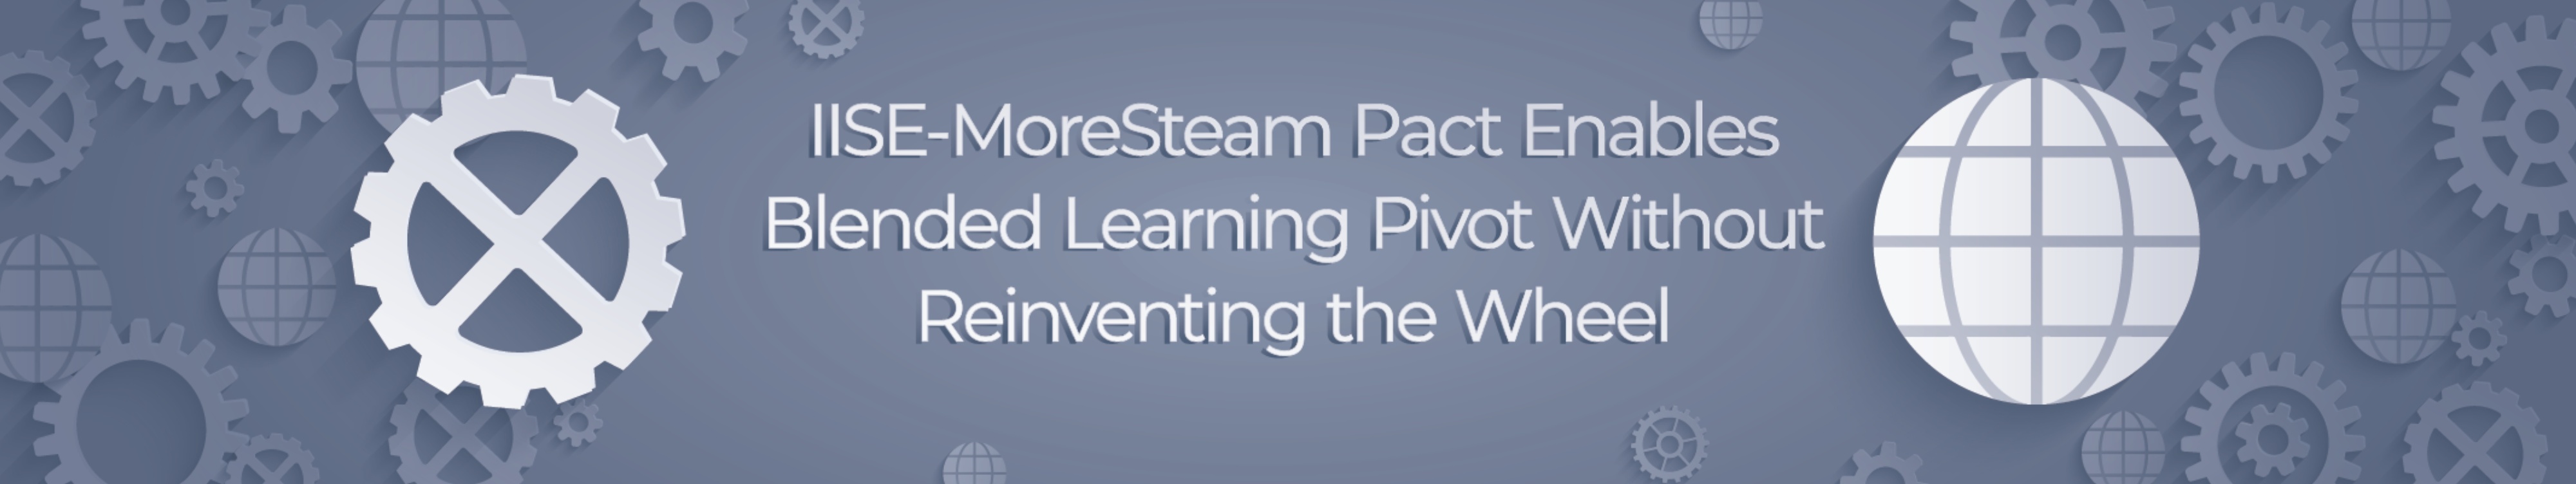 IISE and MoreSteam pact enables blended learning pivot without reinventing the wheel